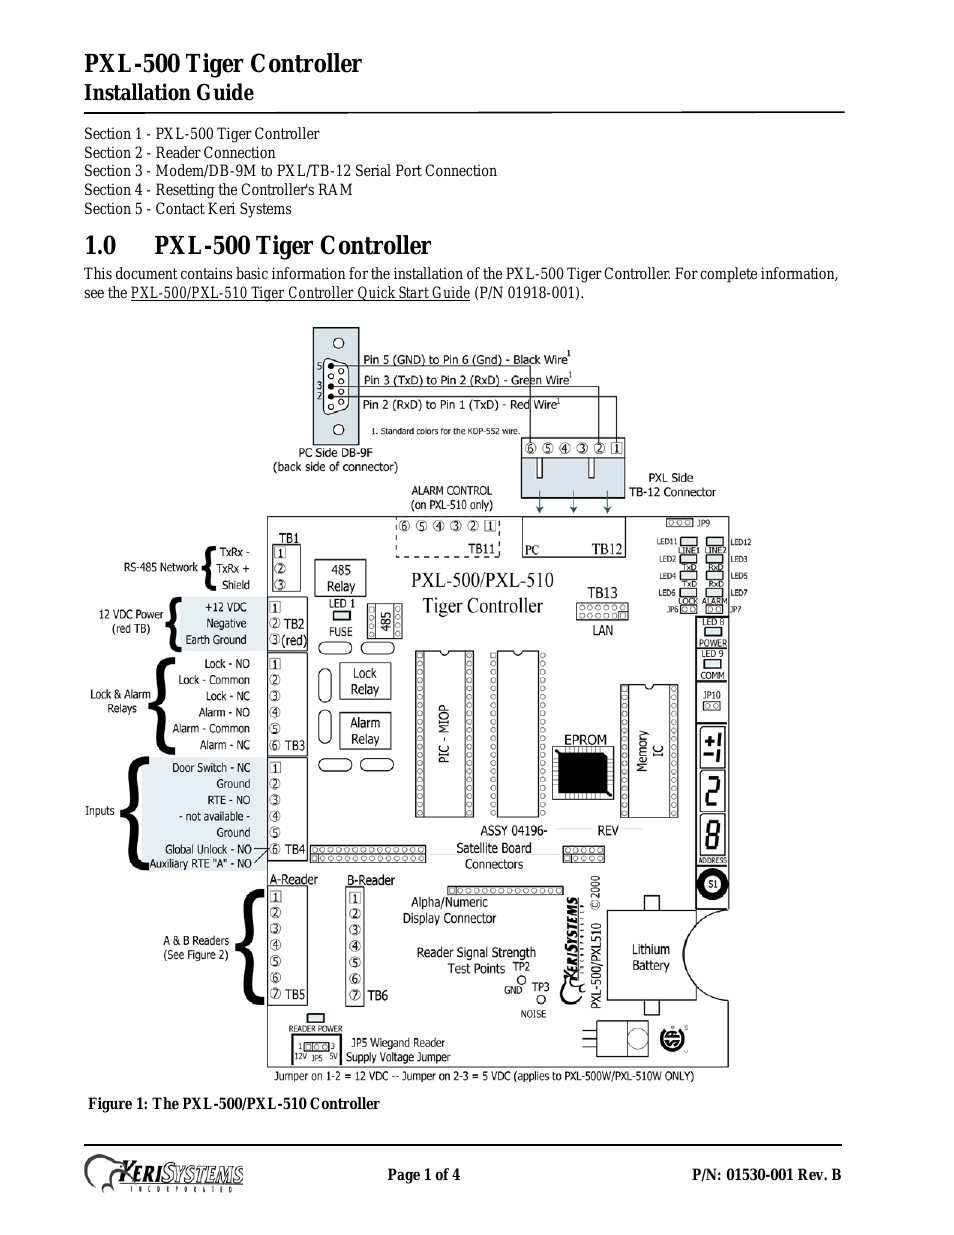 PXL-500 Installation Guide